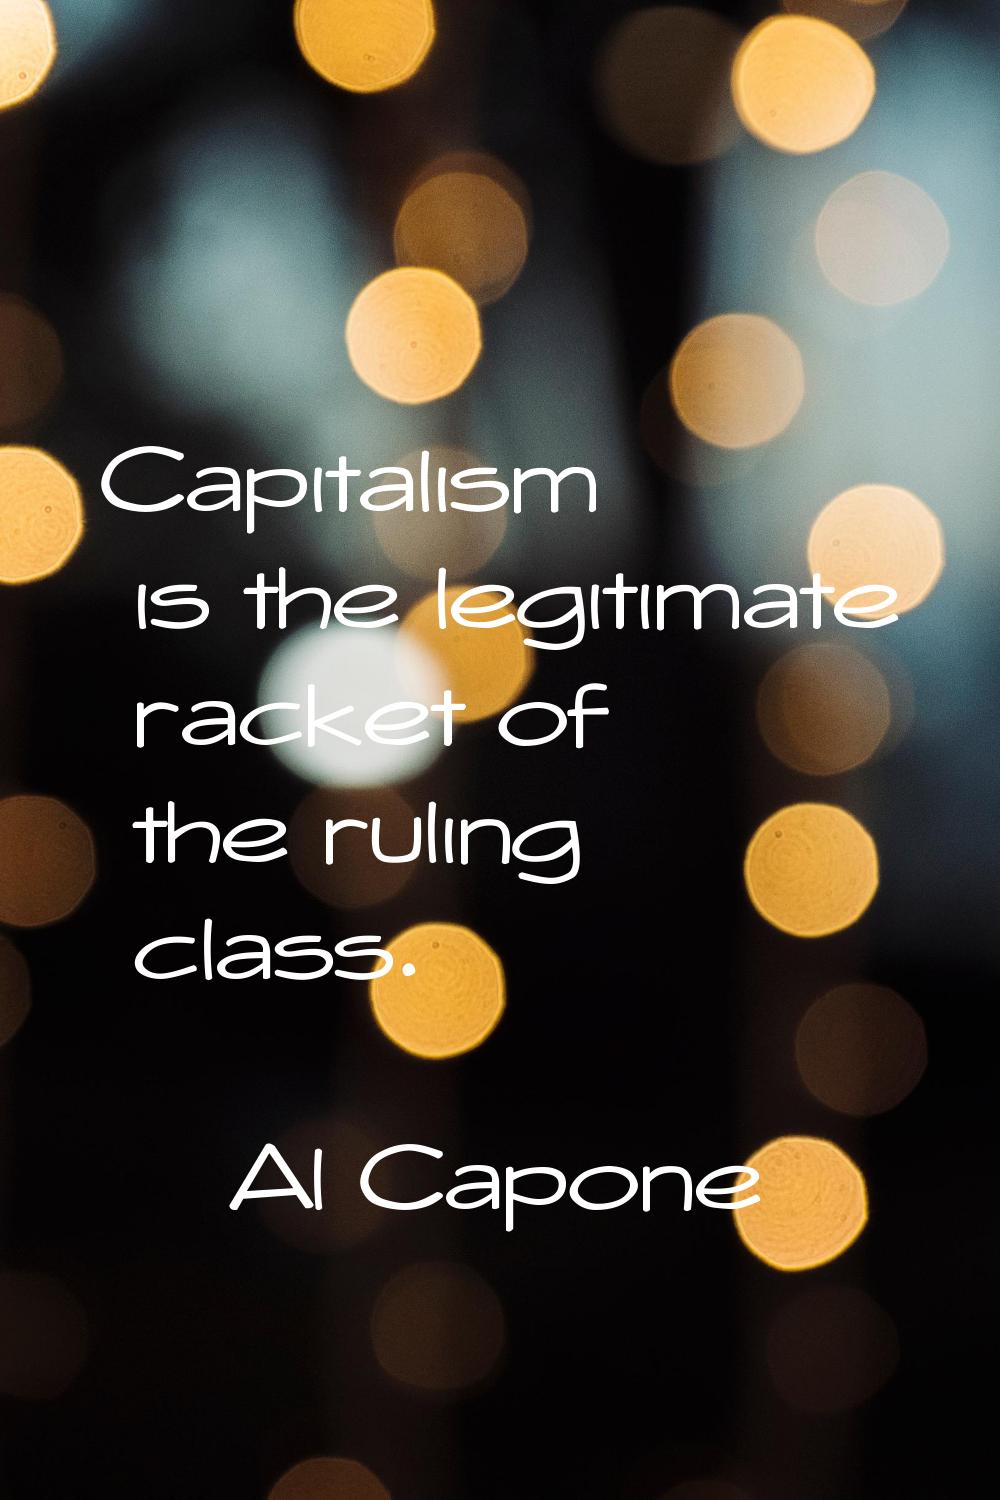 Capitalism is the legitimate racket of the ruling class.